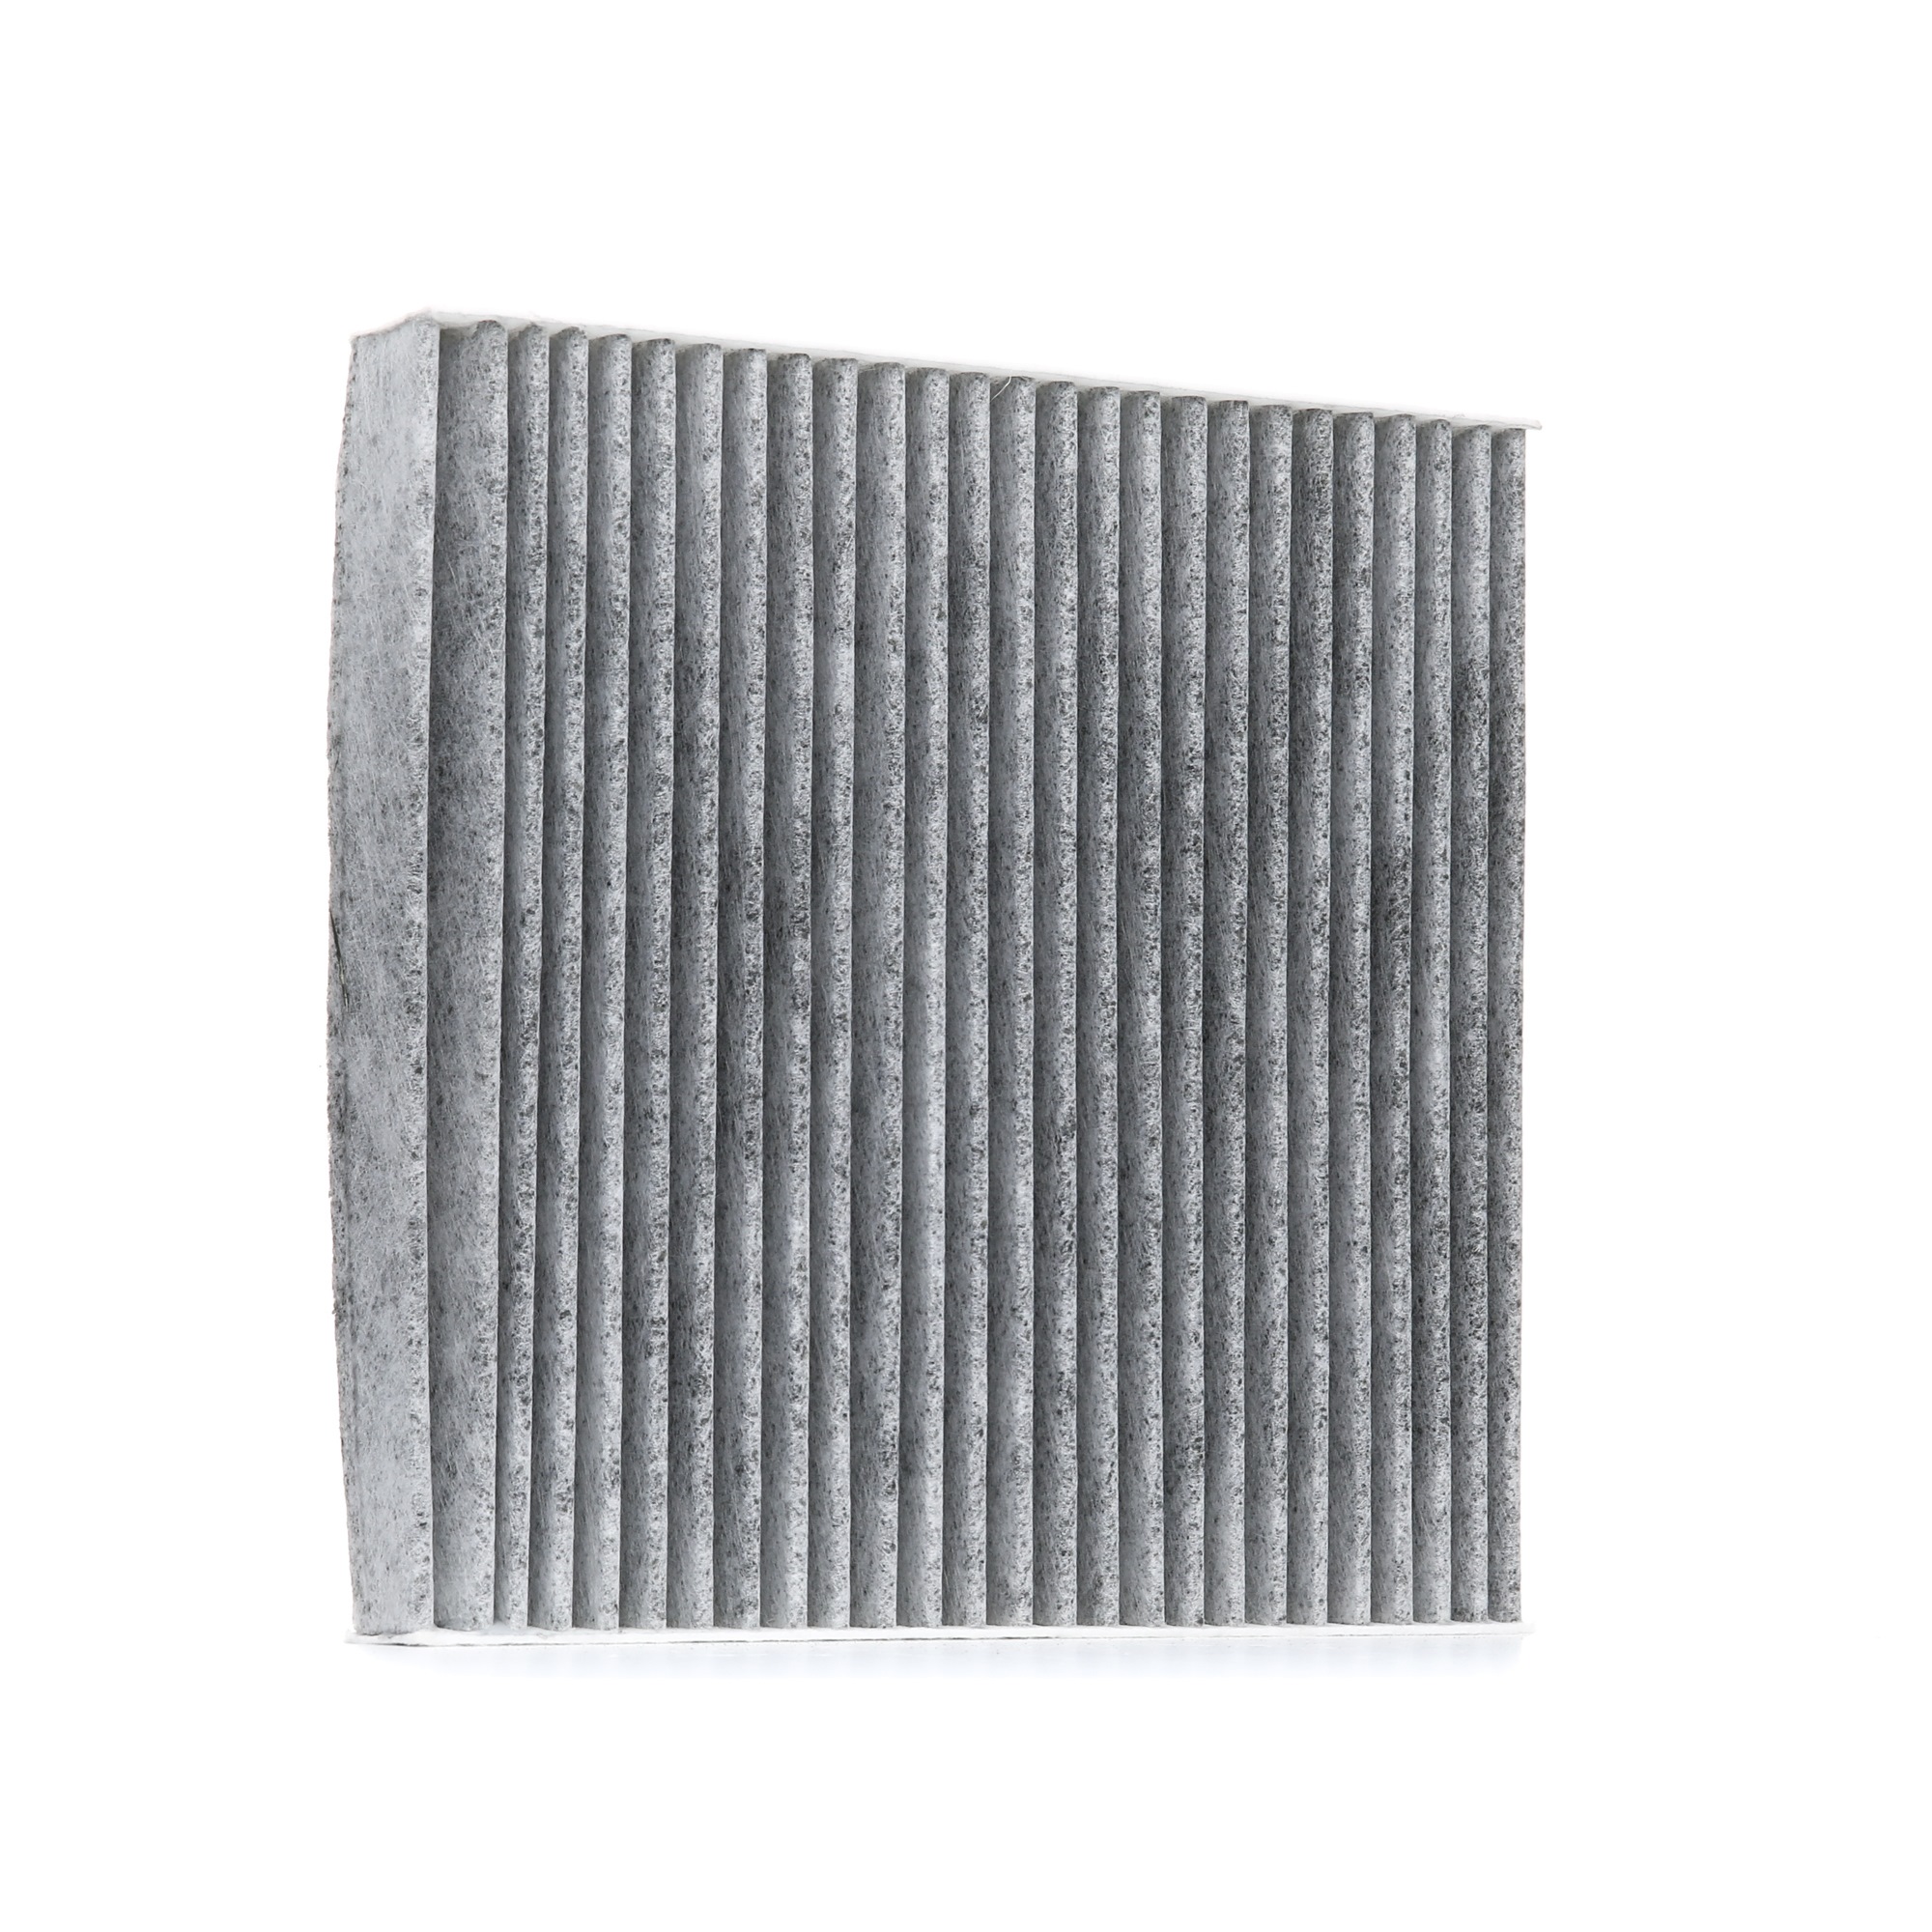 RIDEX Activated Carbon Filter, 212,0 mm x 204,0 mm x 30,0 mm Width: 204,0mm, Height: 30,0mm, Length: 212,0mm Cabin filter 424I0081 buy